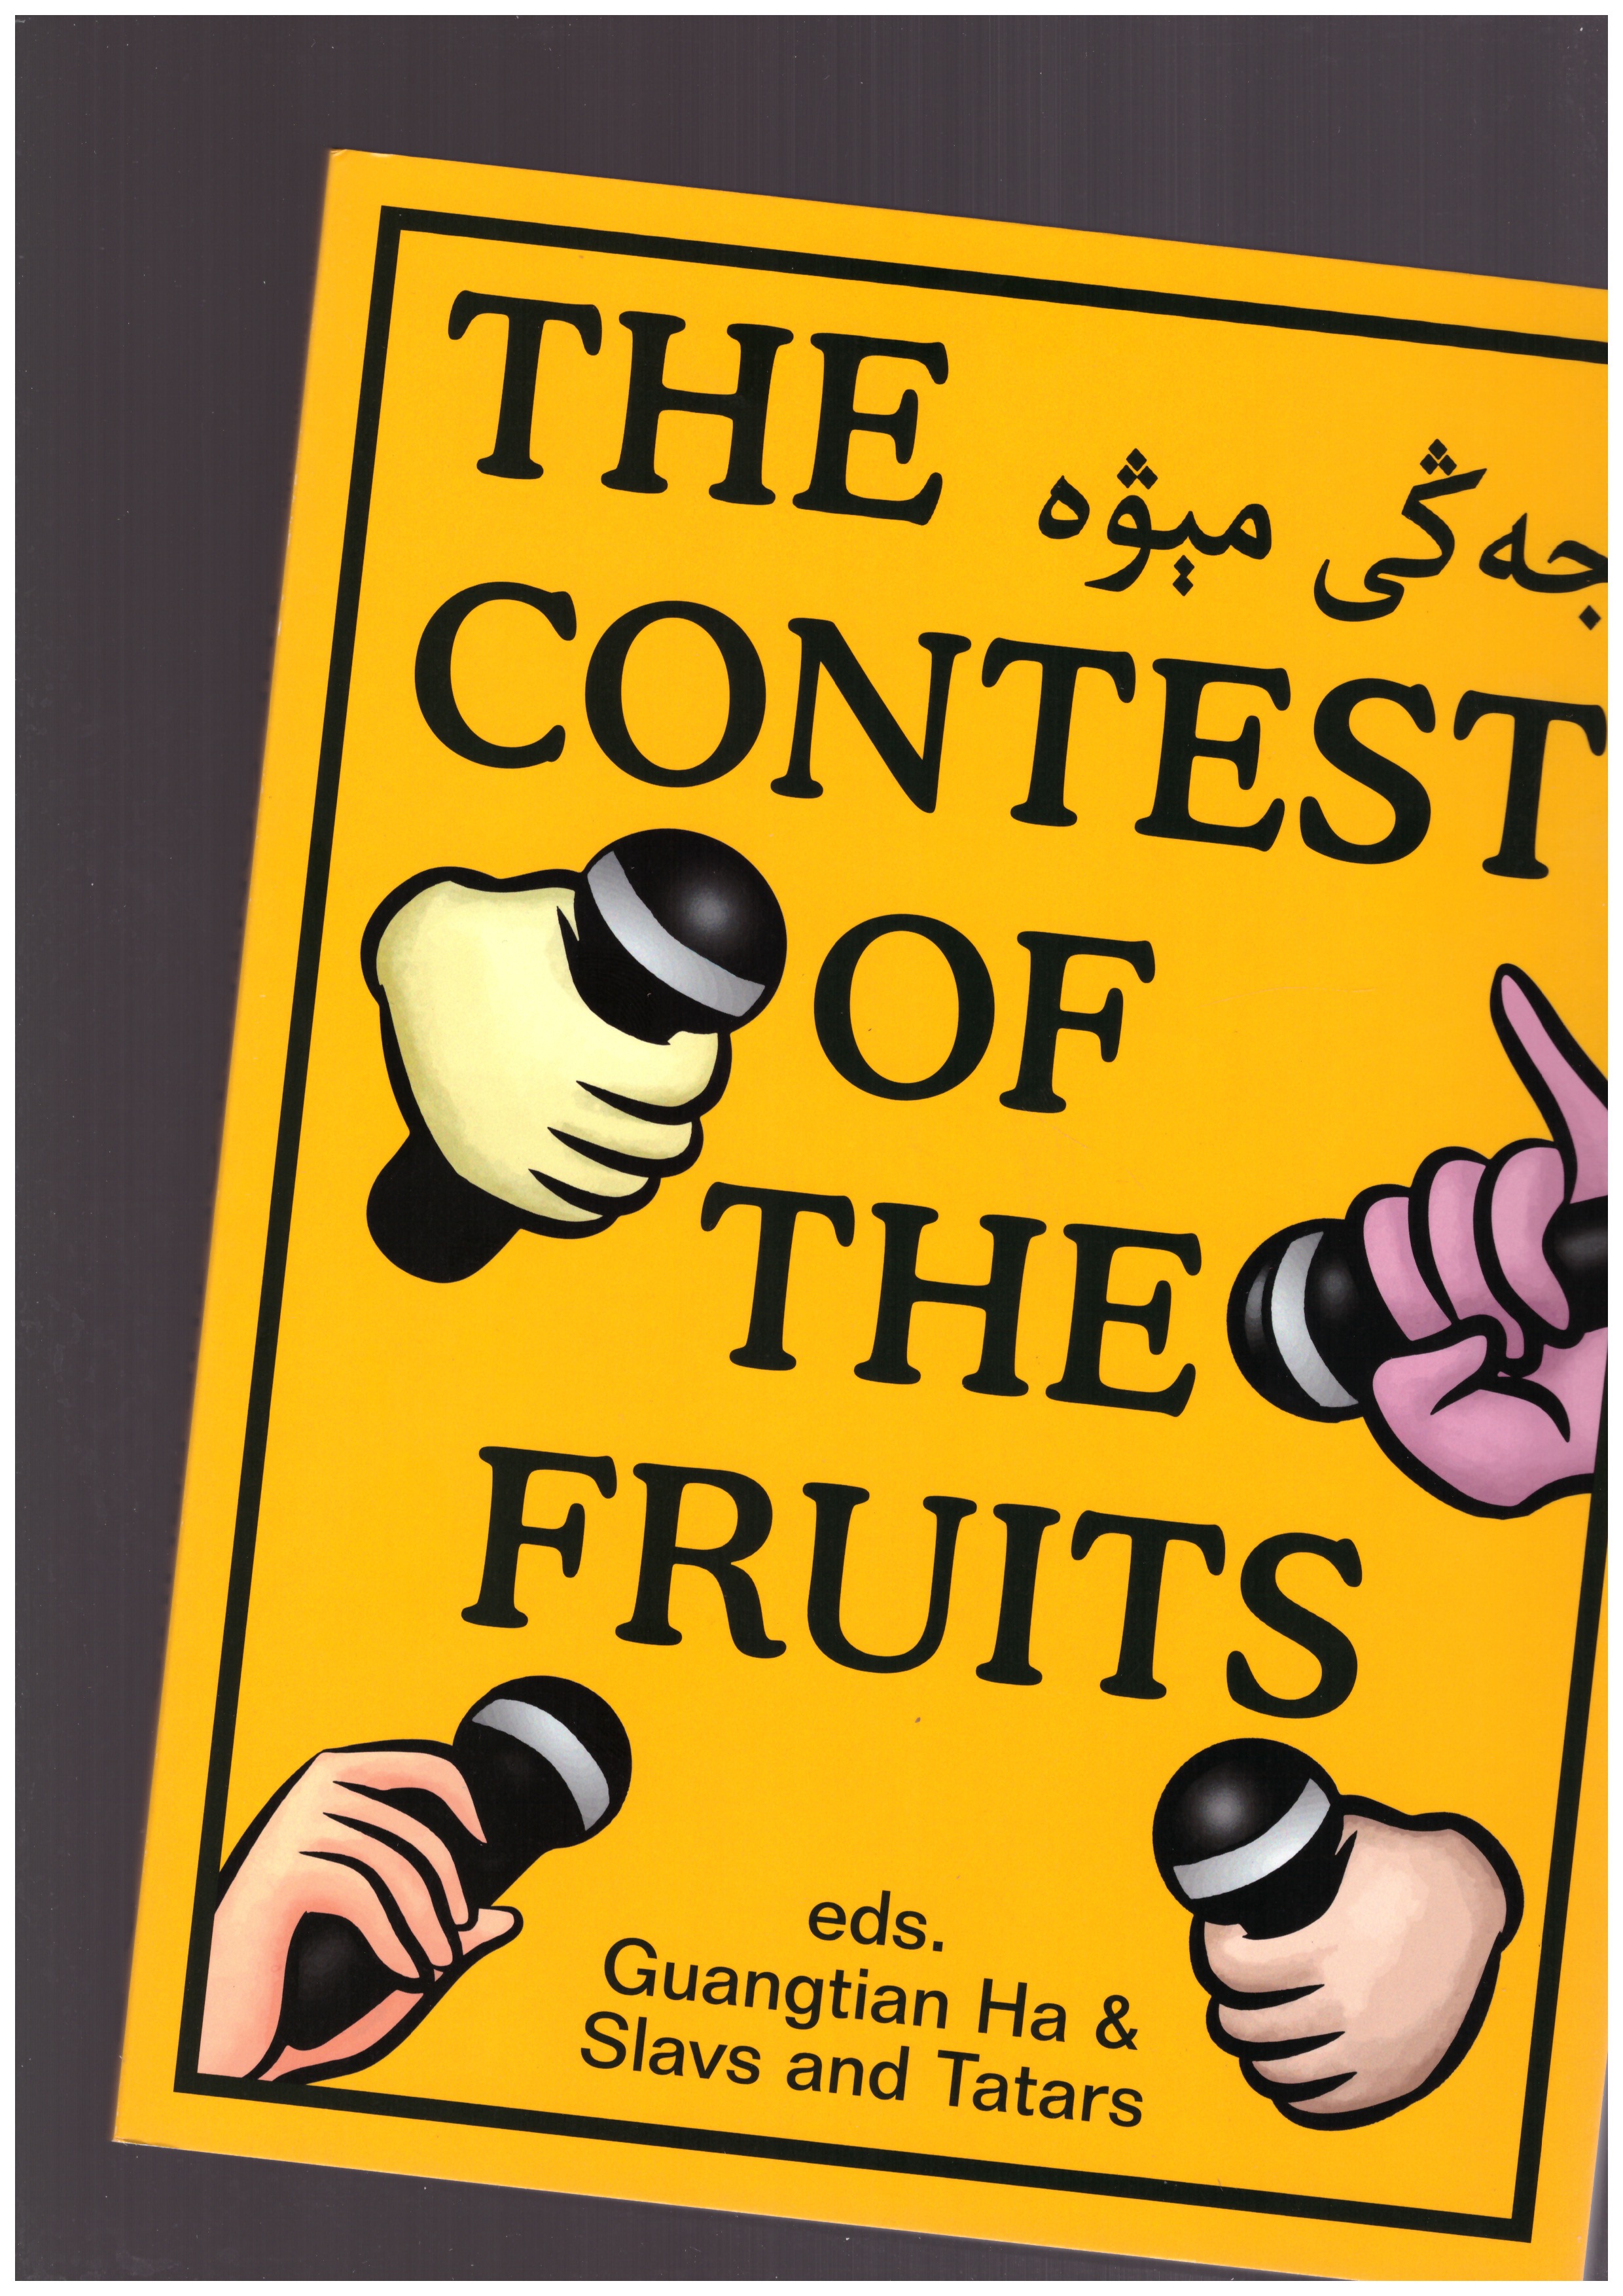 HA, Guangtian; SLAVS AND TATARS (eds.) - The Contest of the Fruits